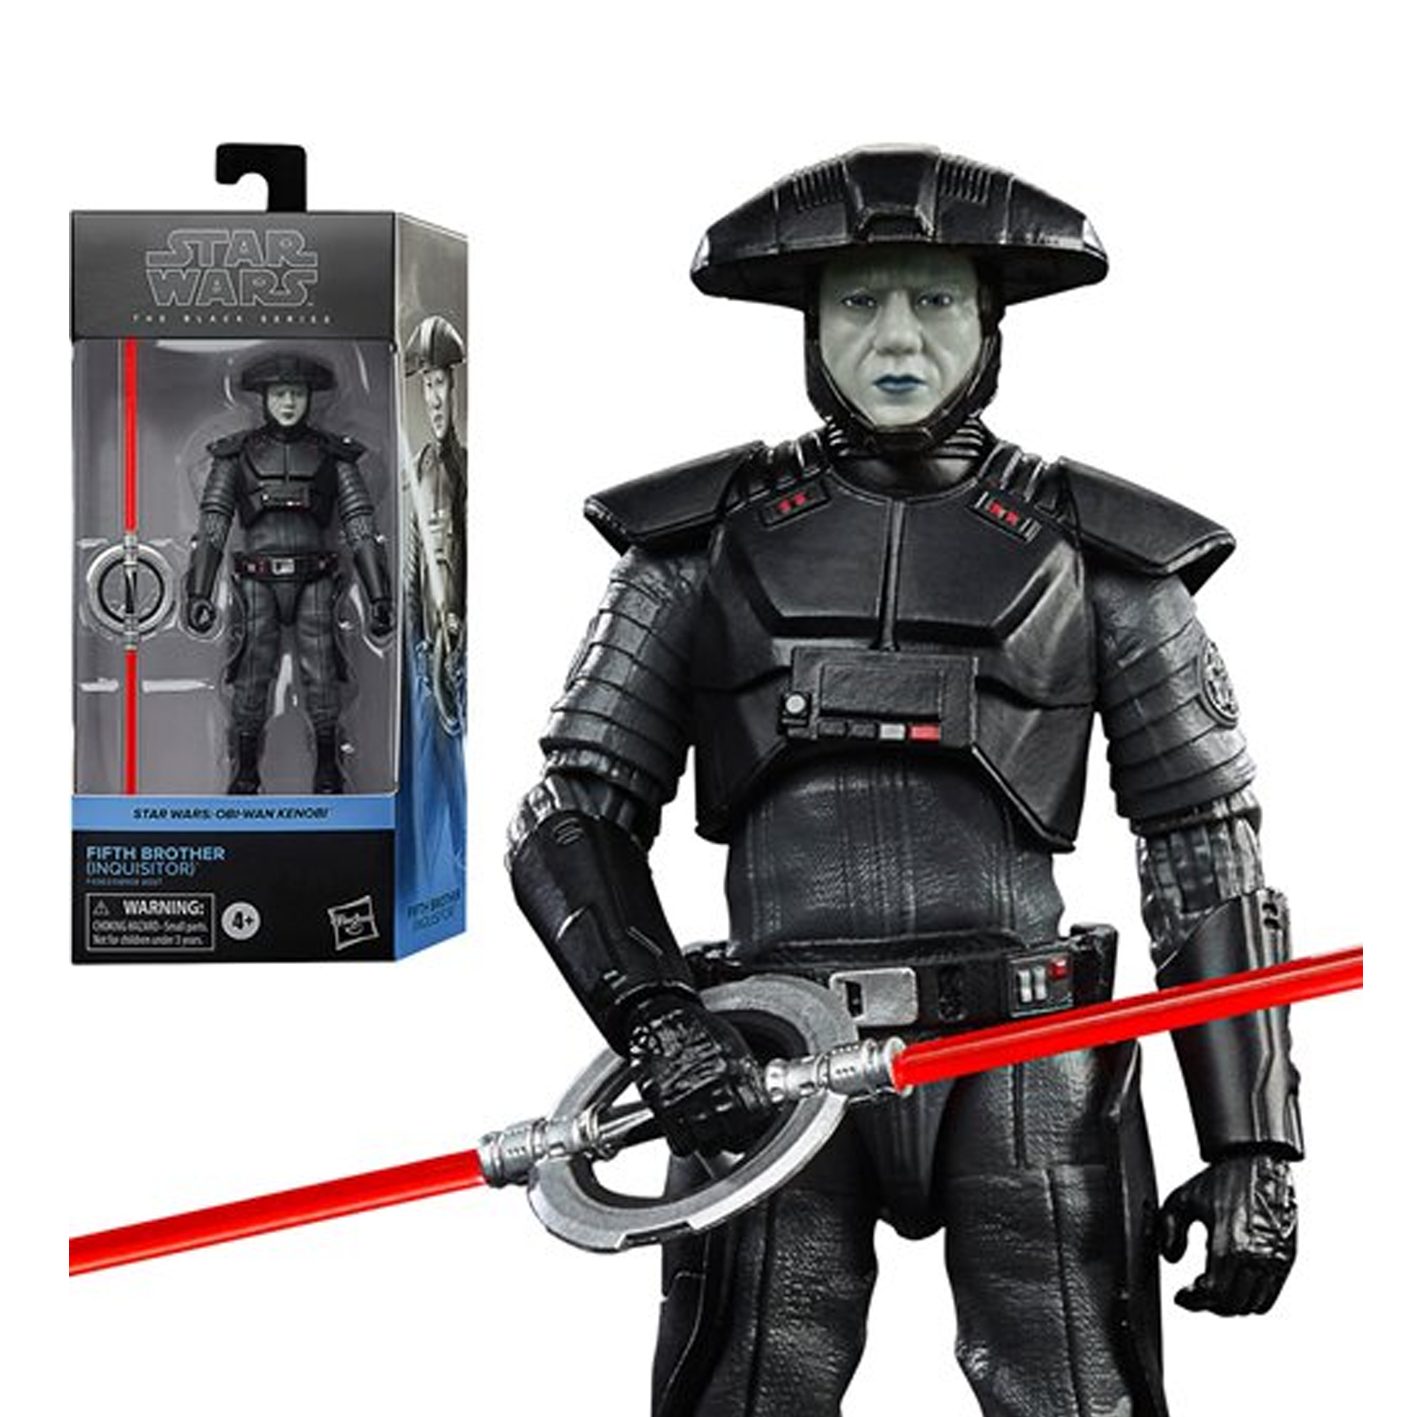 Fifth brother Star Wars The Black Series